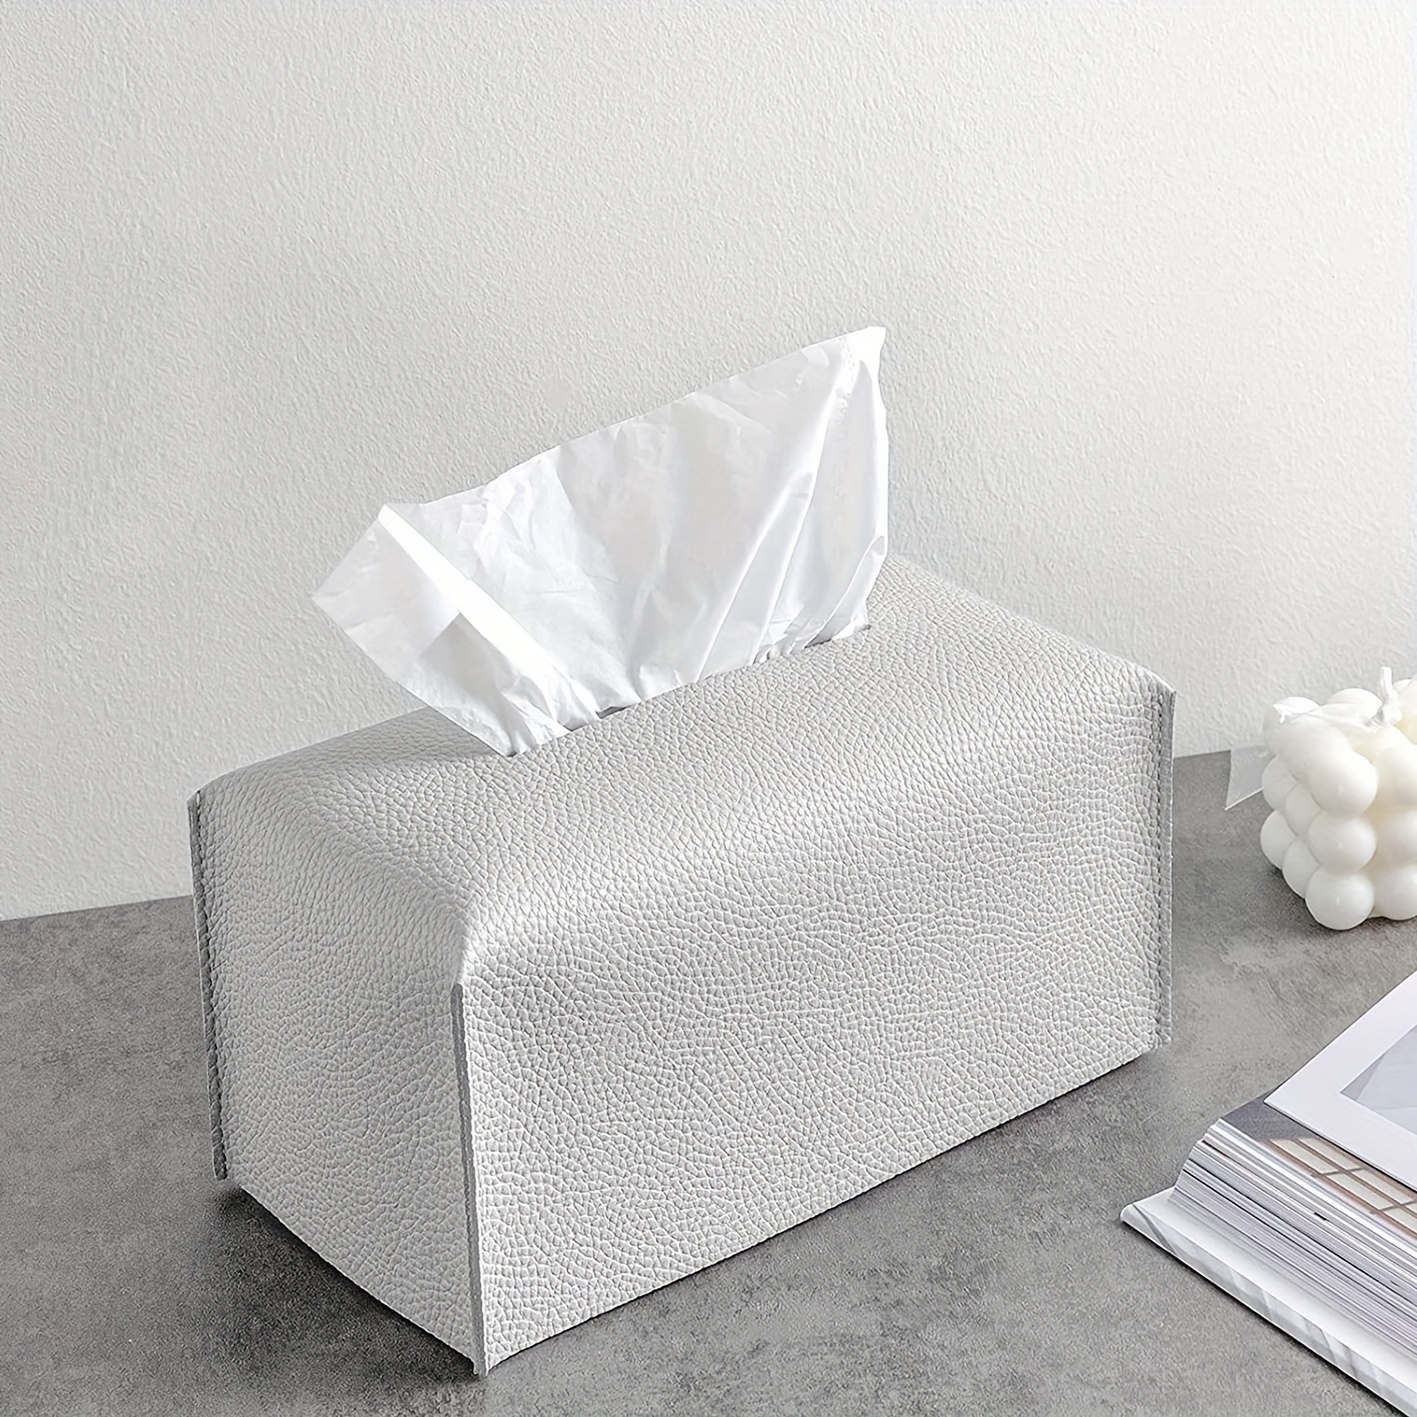 Tissue box cover - Coffee brown with grey vintage design 1